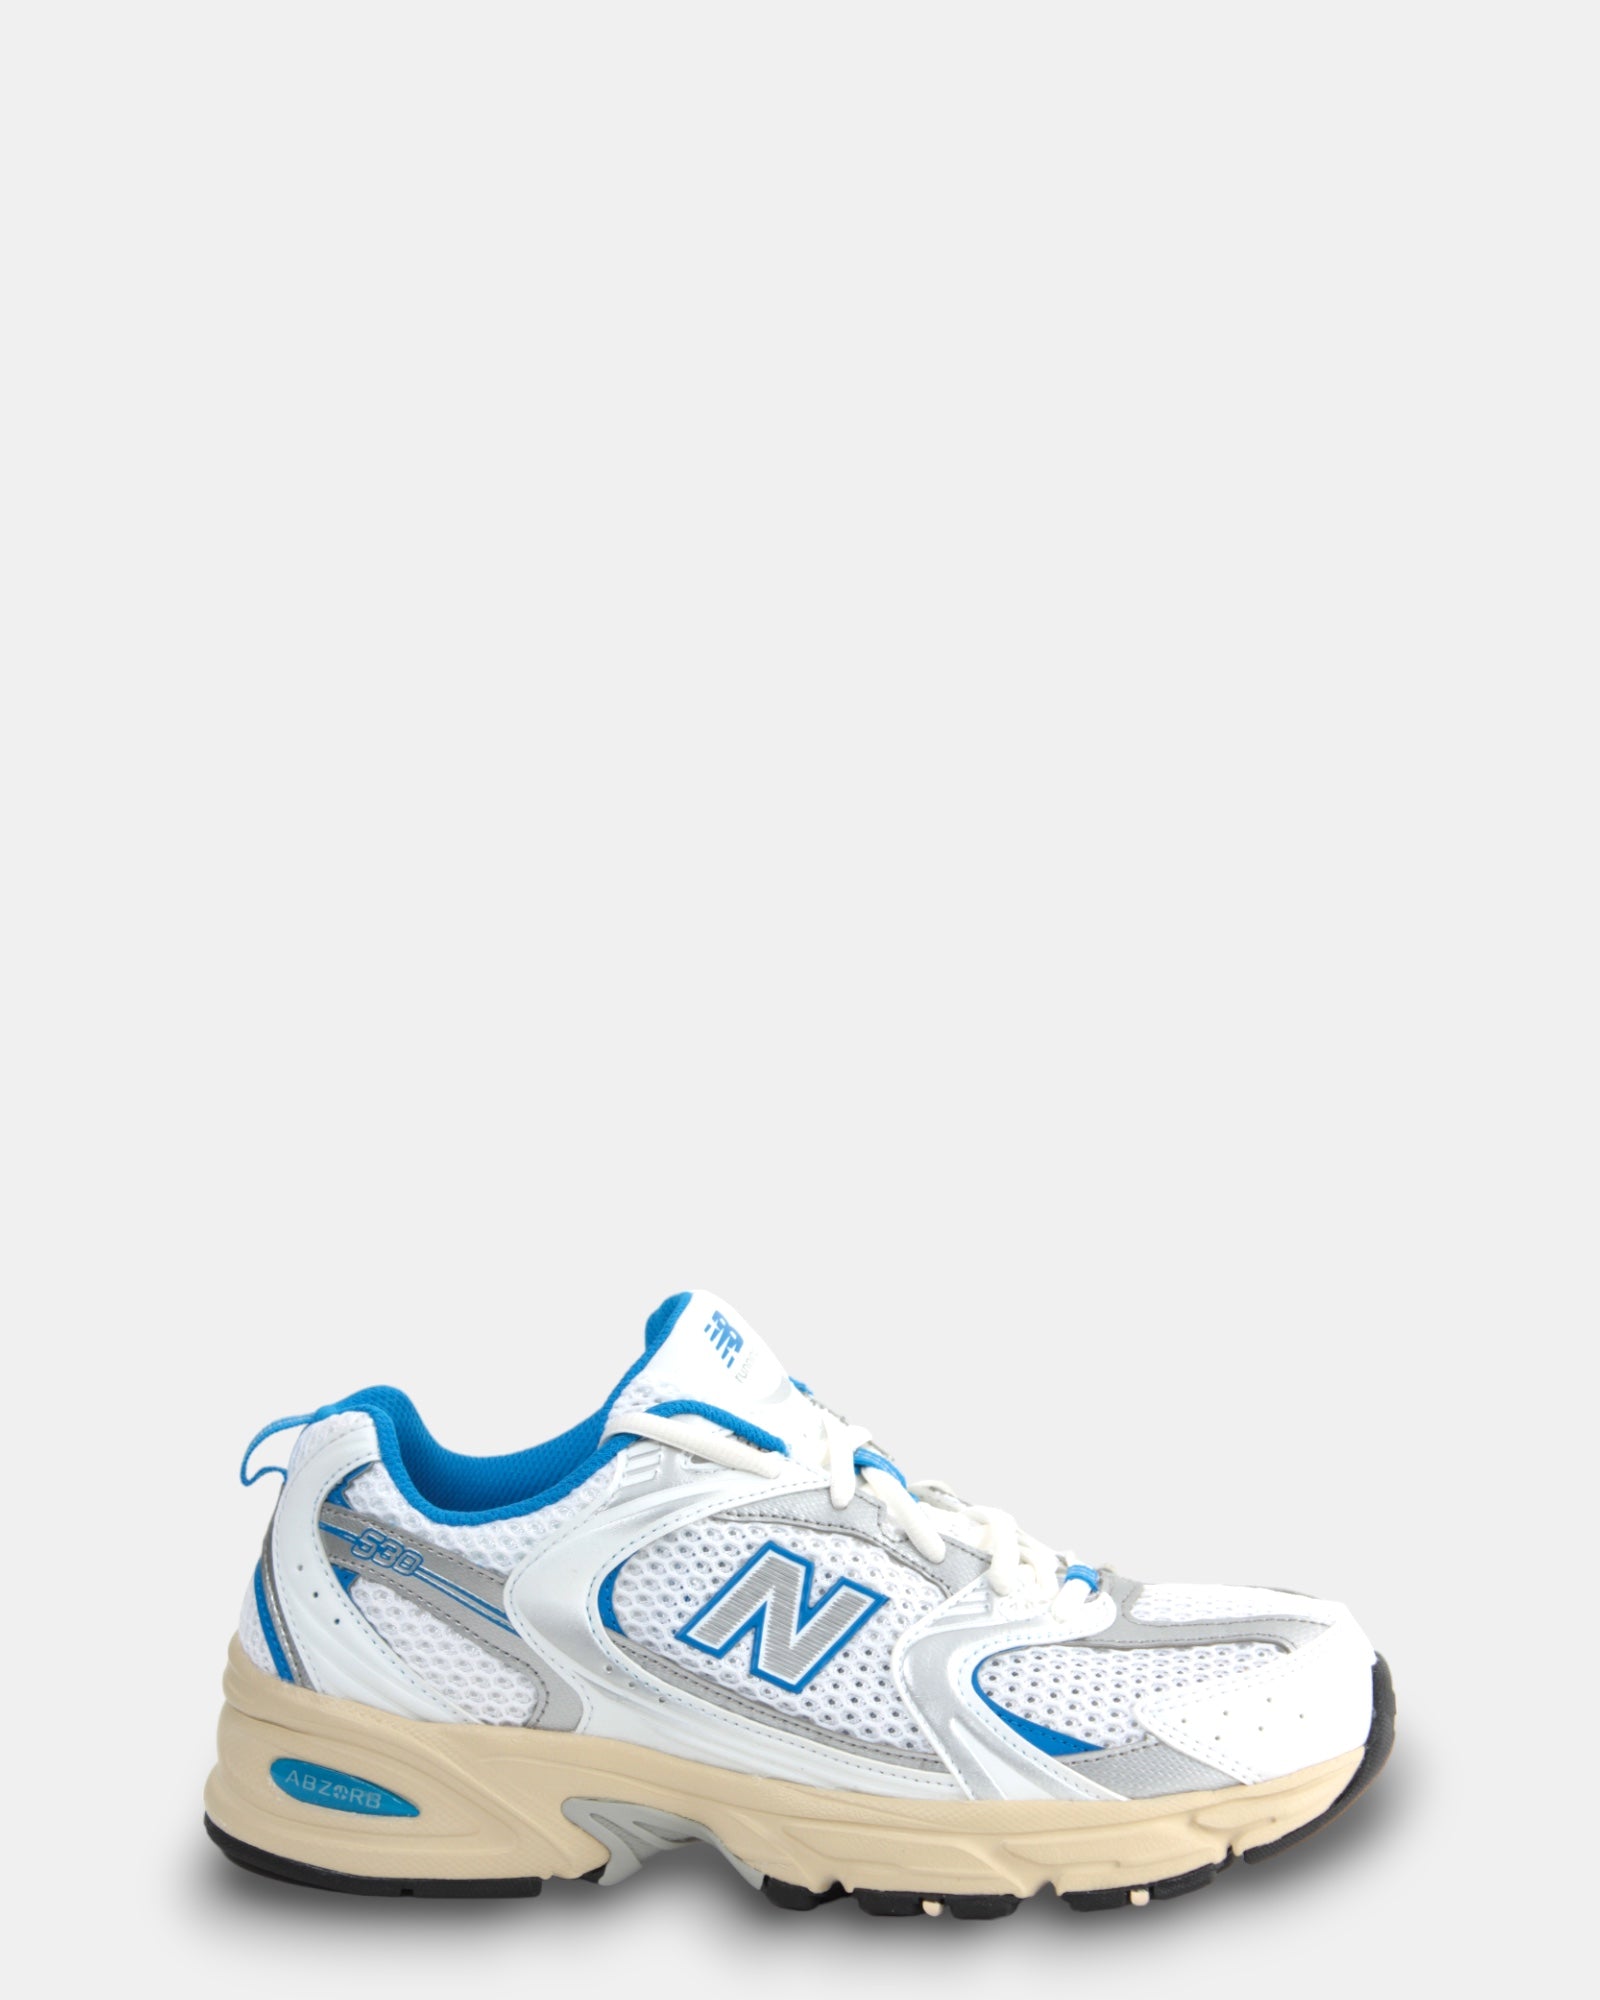 SNEAKERS White/blue New Balance